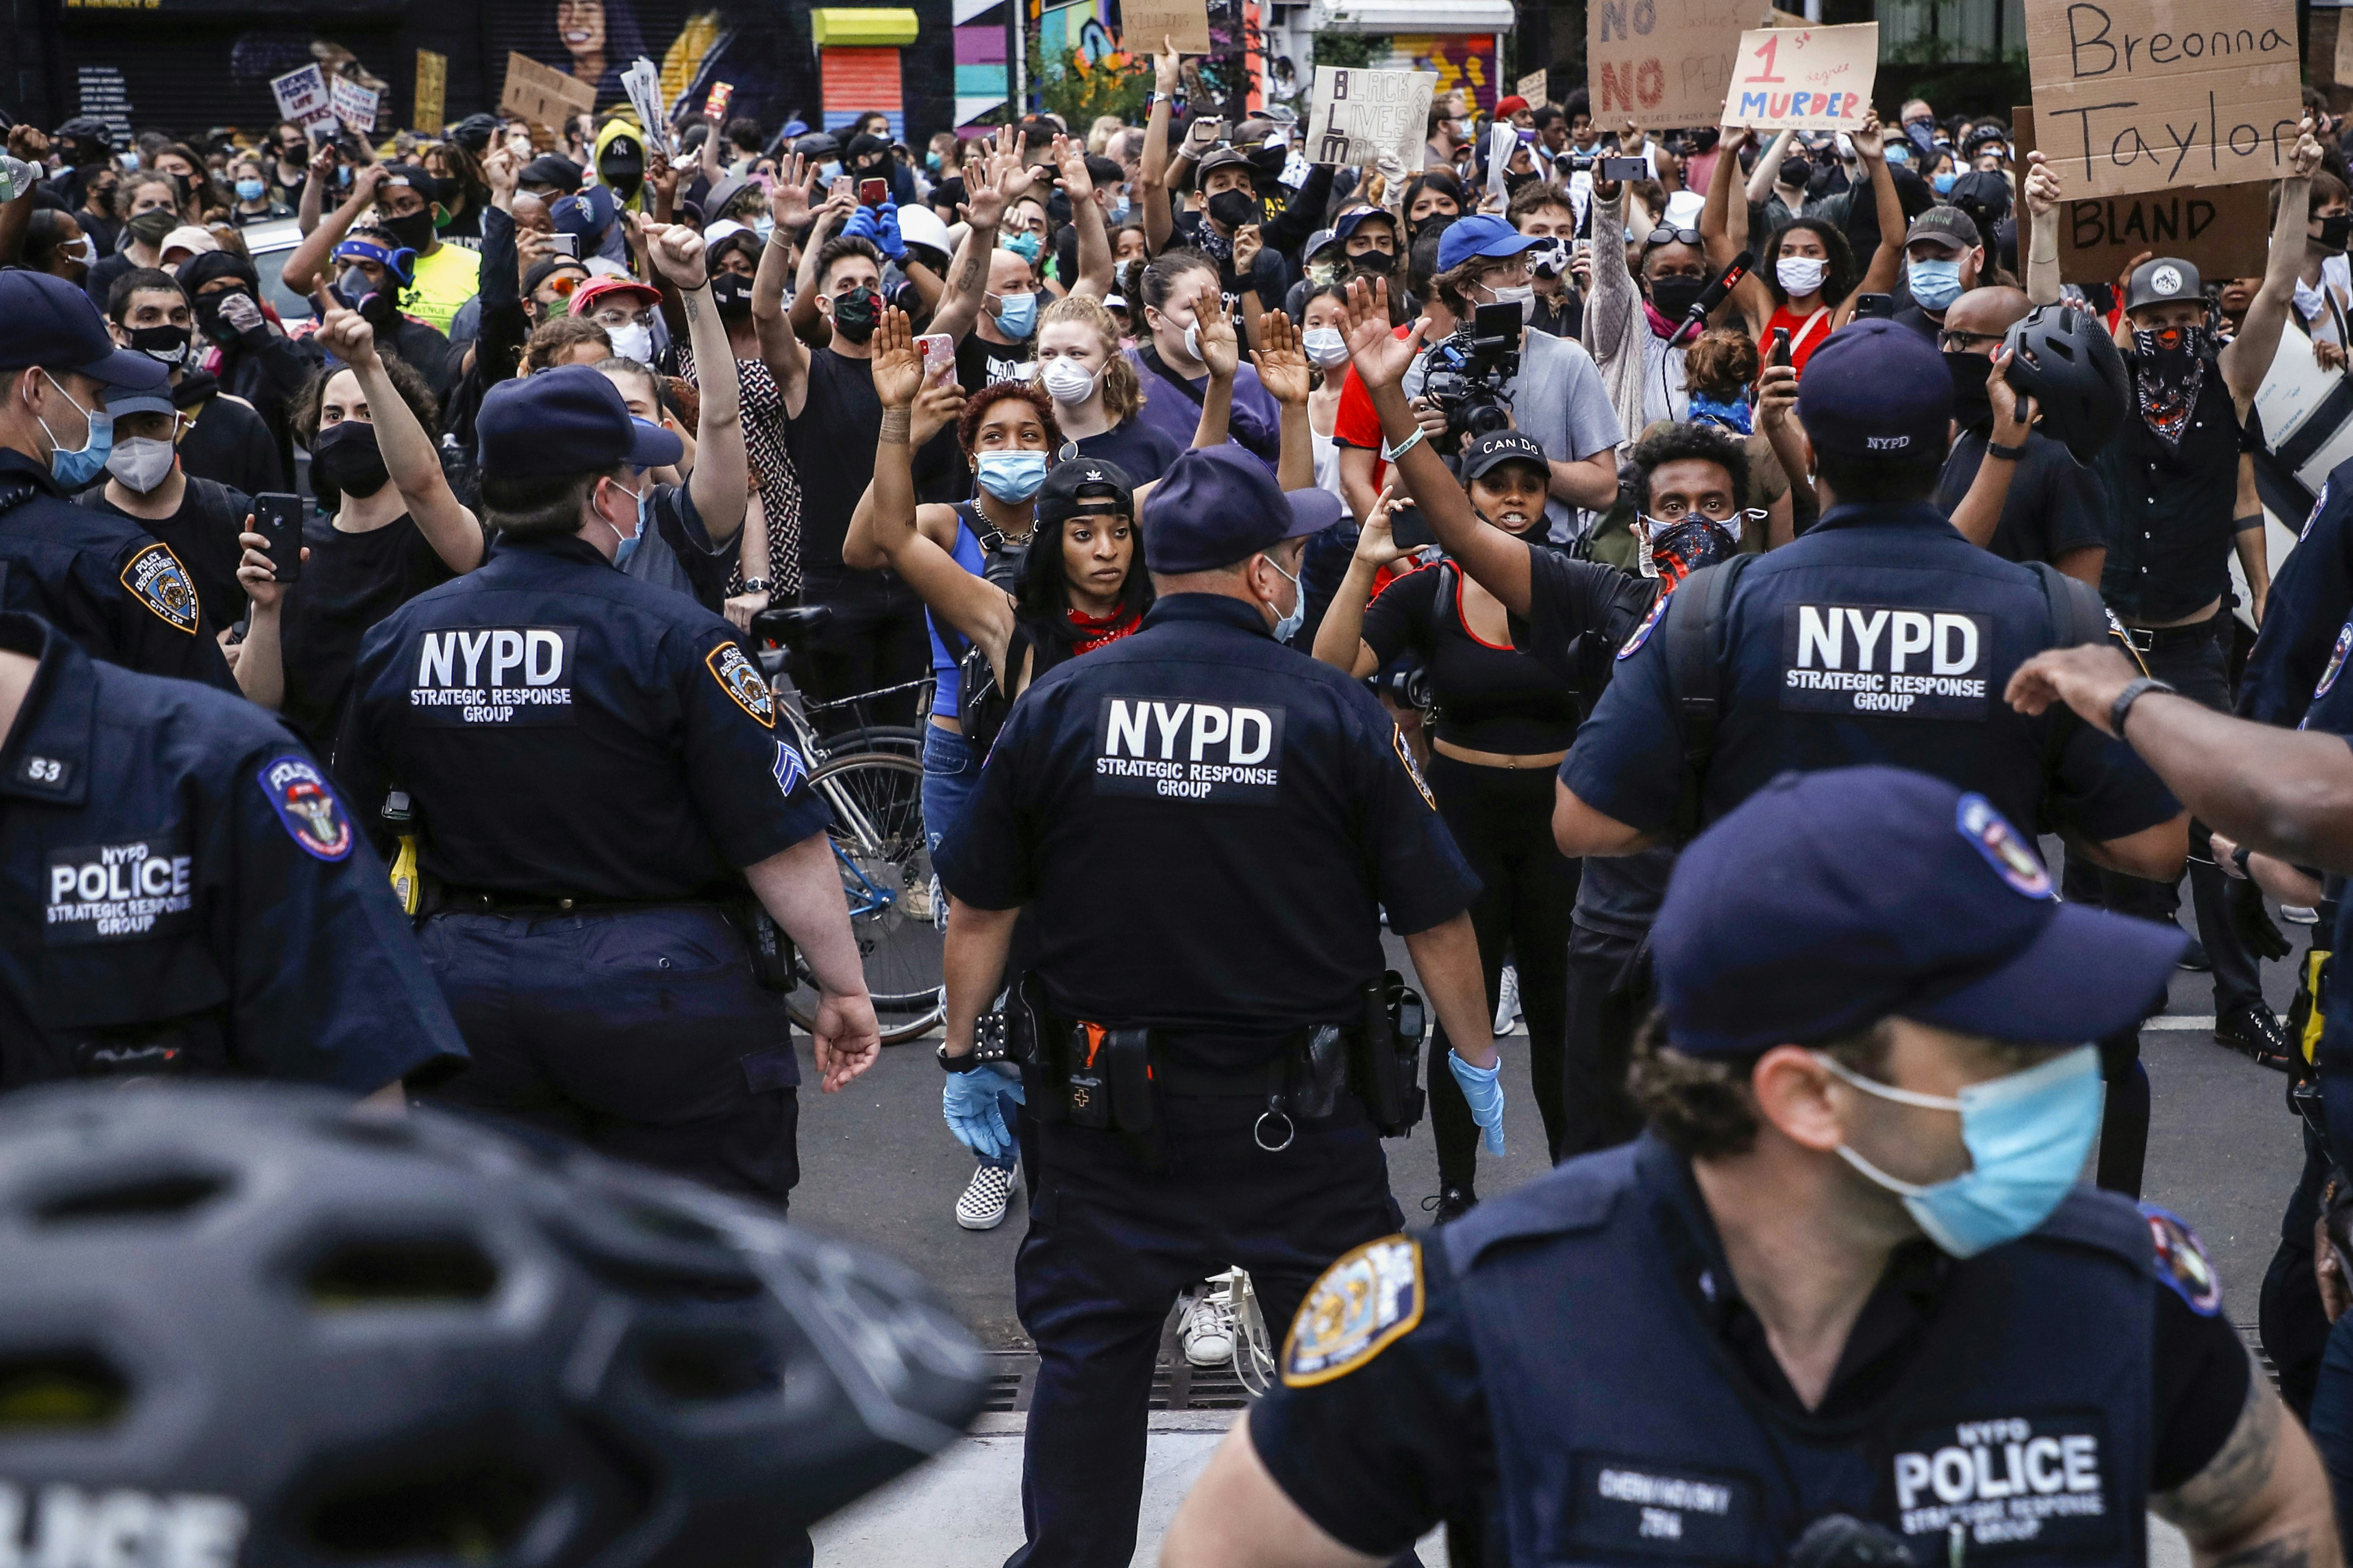 Demonstrators clash with the police in Barclays center, New York, US, on May 29, 2020 during a protest in response to the death of Minneapolis man George Floyd. The video that captured the death of George Floyd implicated the arresting officers sparking days of riots in Minneapolis Minnesota. Governor Tim Waltz (MN) called in the National guard to quell the violent riots, looting and fires. (Photo by John Lamparski/NurPhoto via Getty Images)